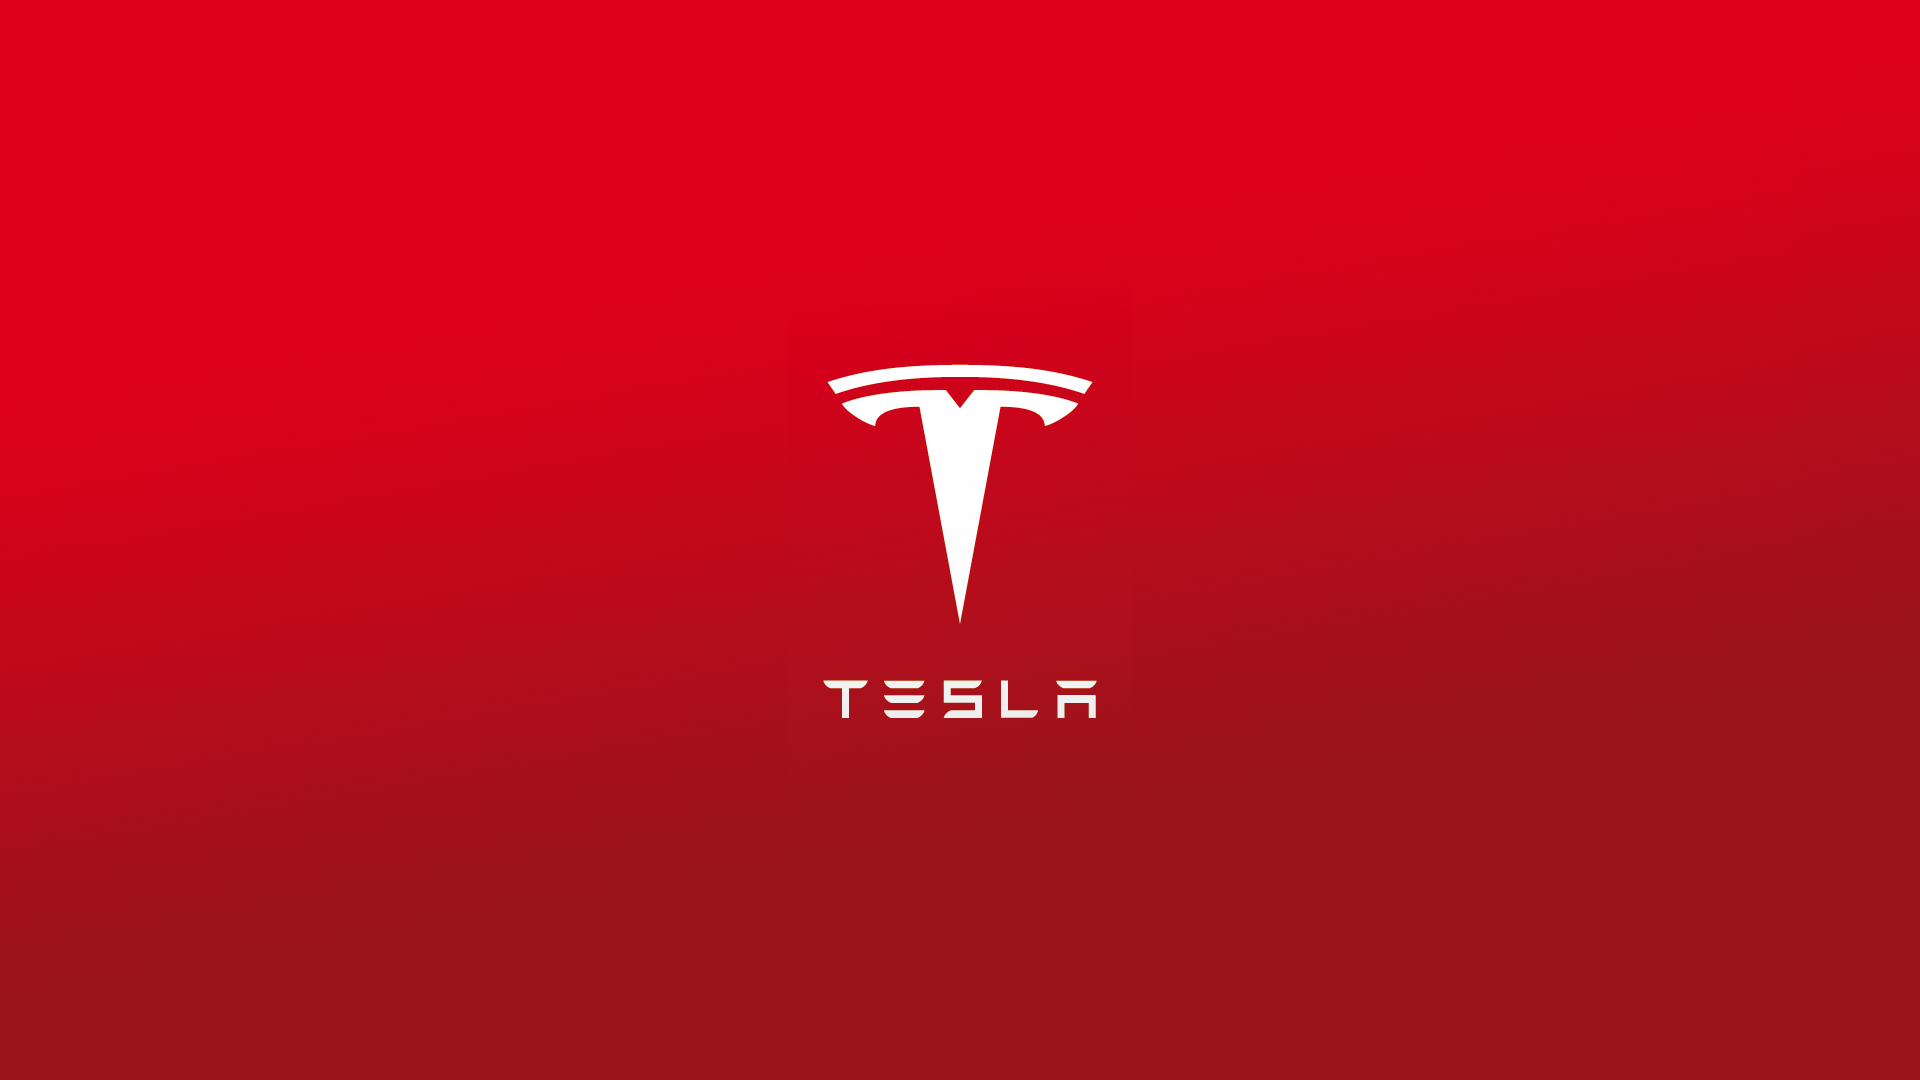 General 1920x1080 Tesla logo red background simple background red